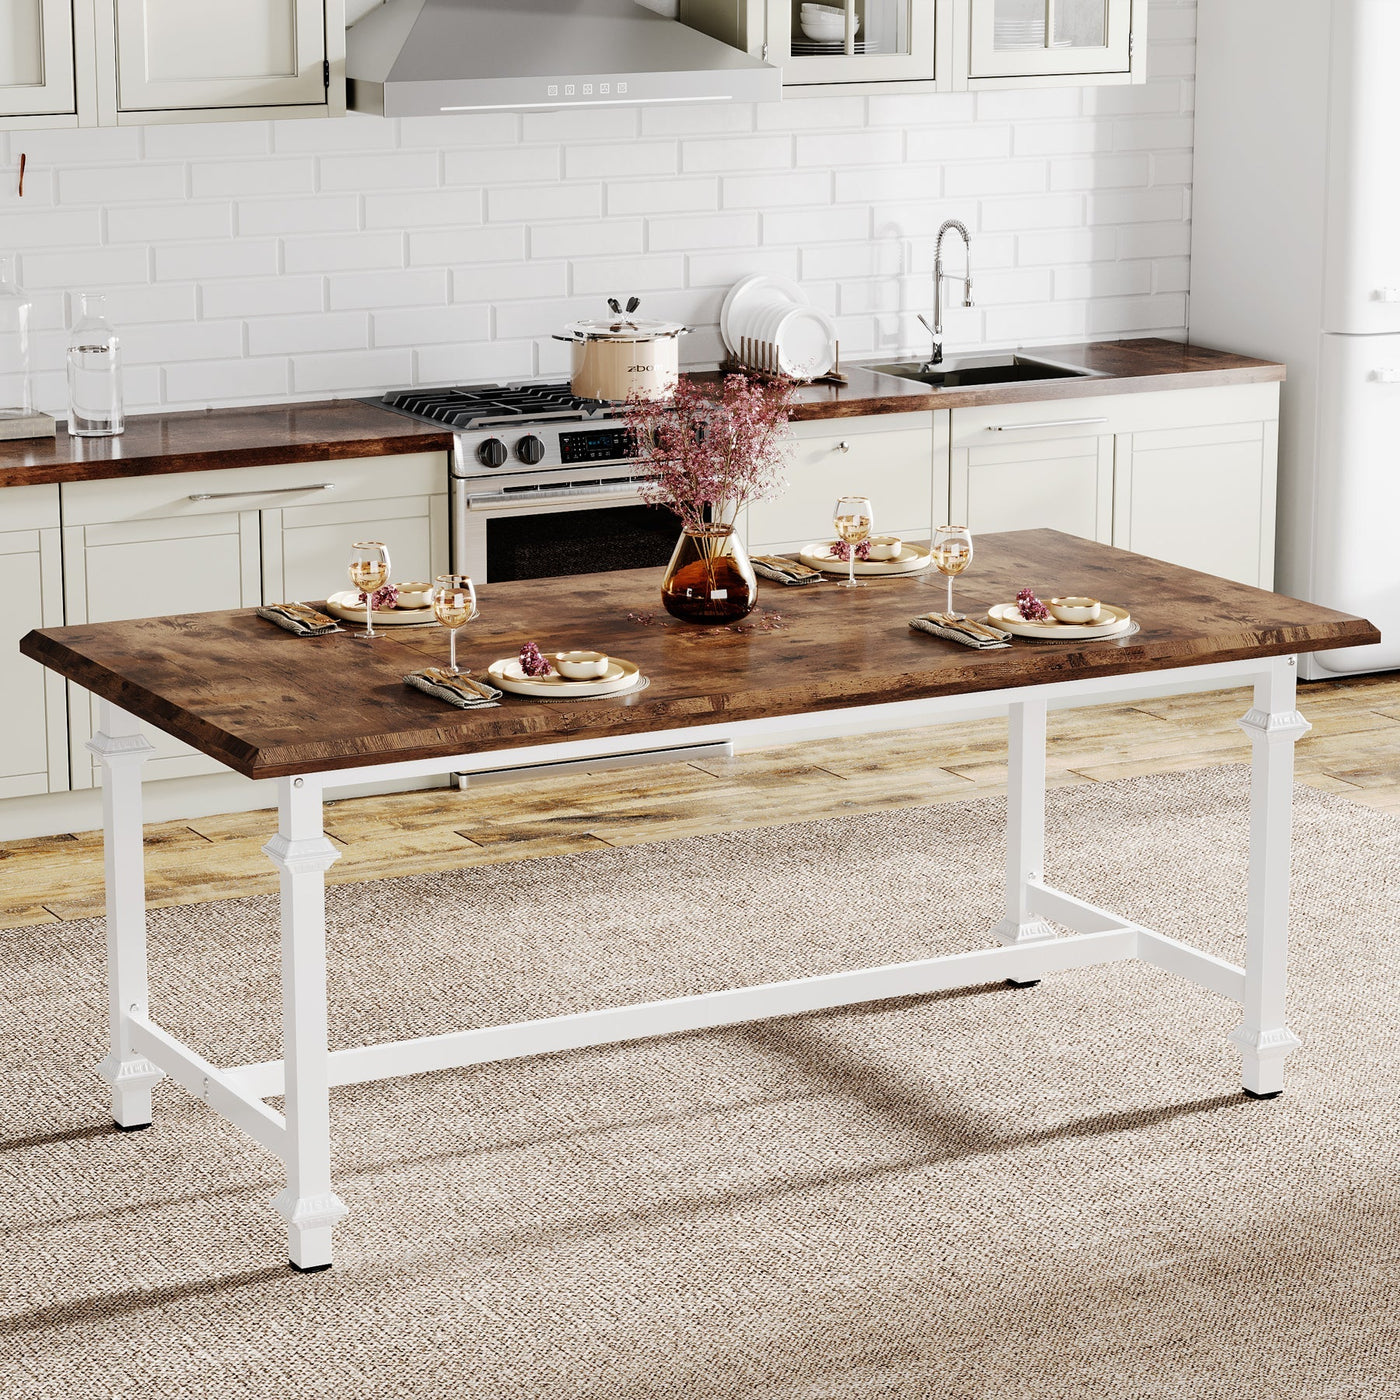 Bertene Wooden Dining Table, White Brown Wood Farmhouse Kitchen Table for 6